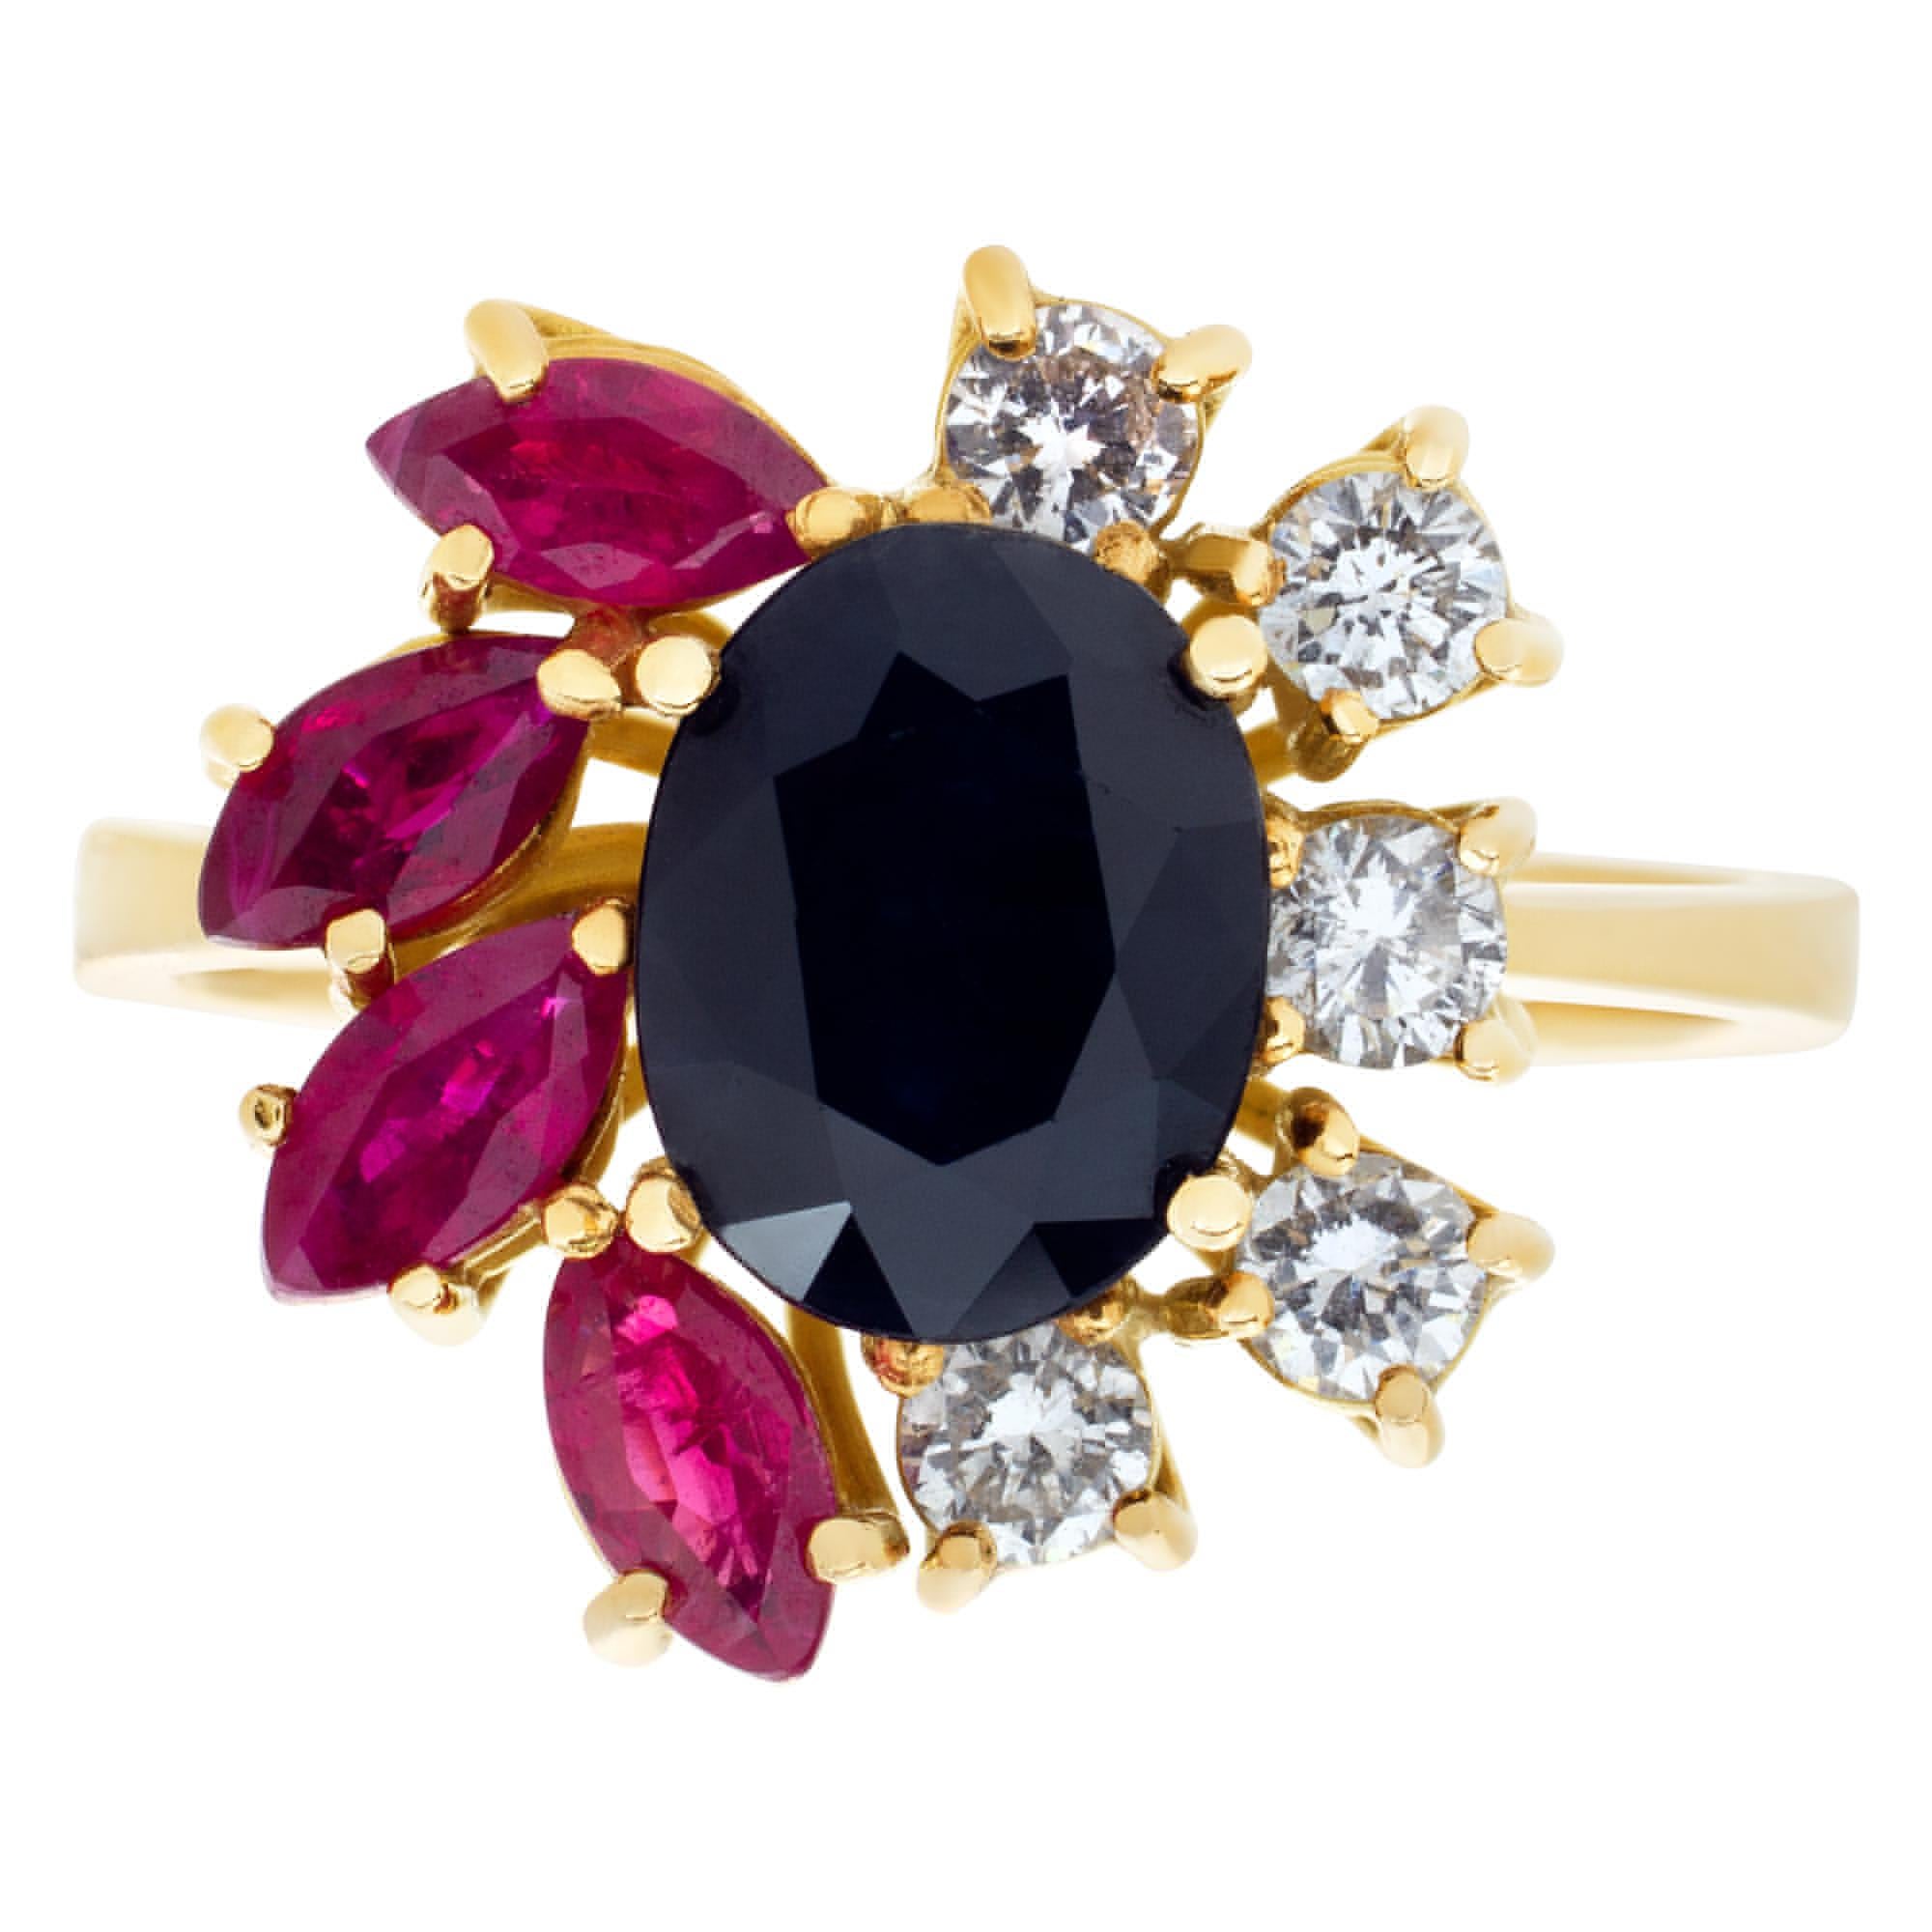 Flower style ring with rubies, sapphires and diamonds in 18k gold. Size 6.25

This Diamond/Sapphire/Ruby ring is currently size 6.25 and some items can be sized up or down, please ask! It weighs 3 pennyweights and is Gold.